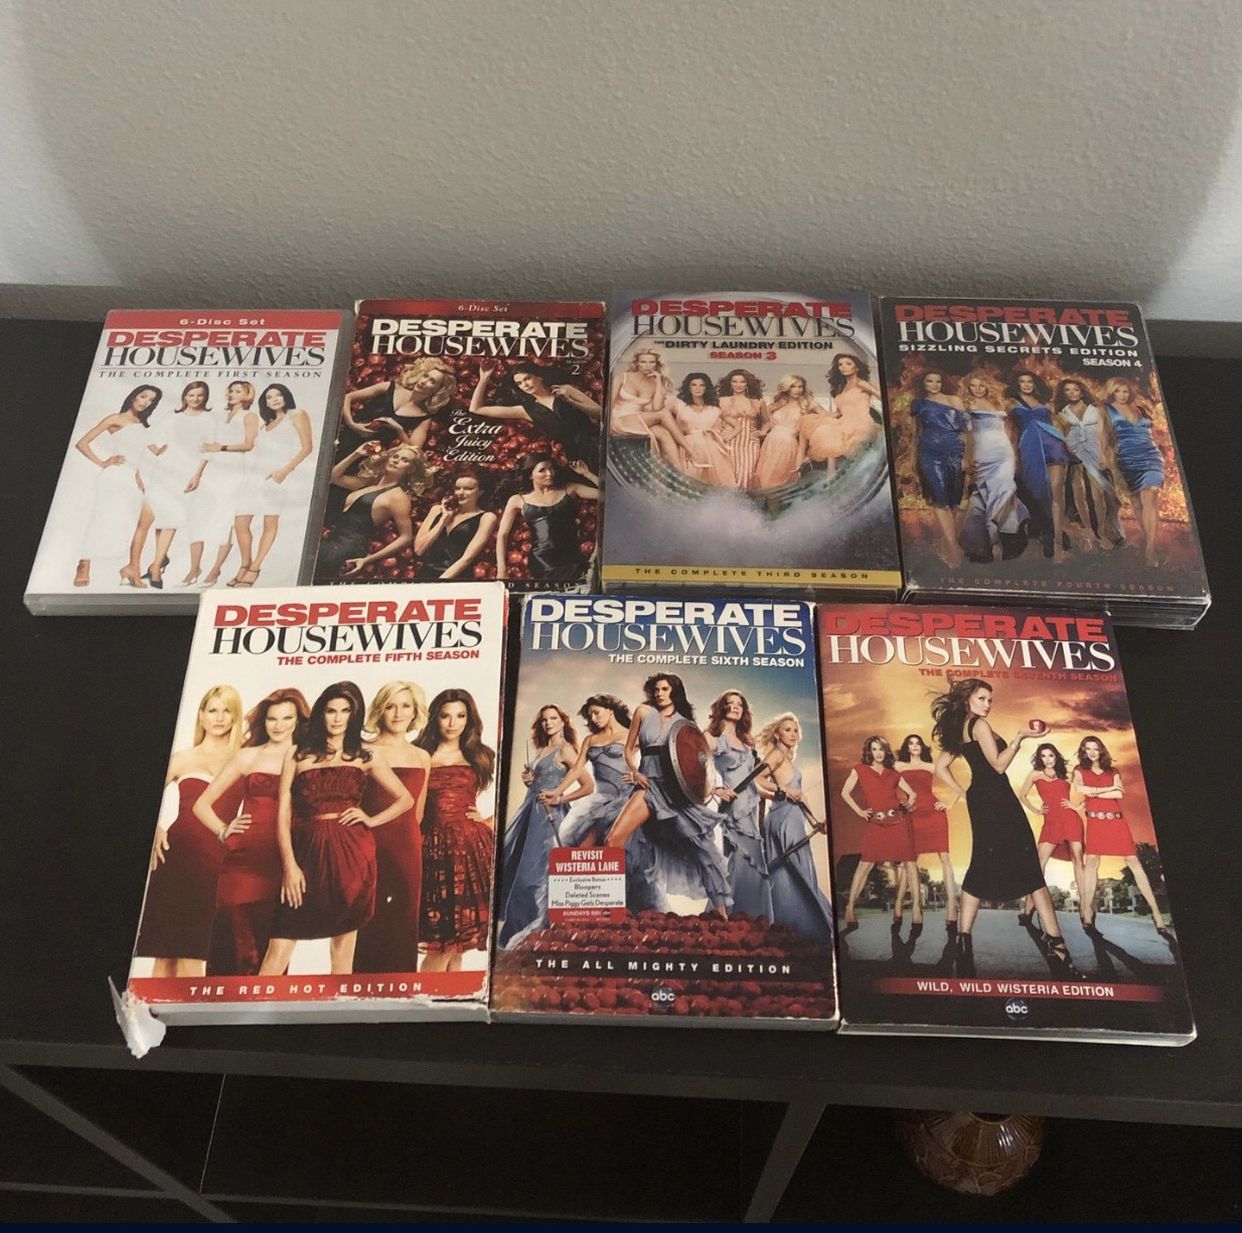 Desperate Housewives DvDs